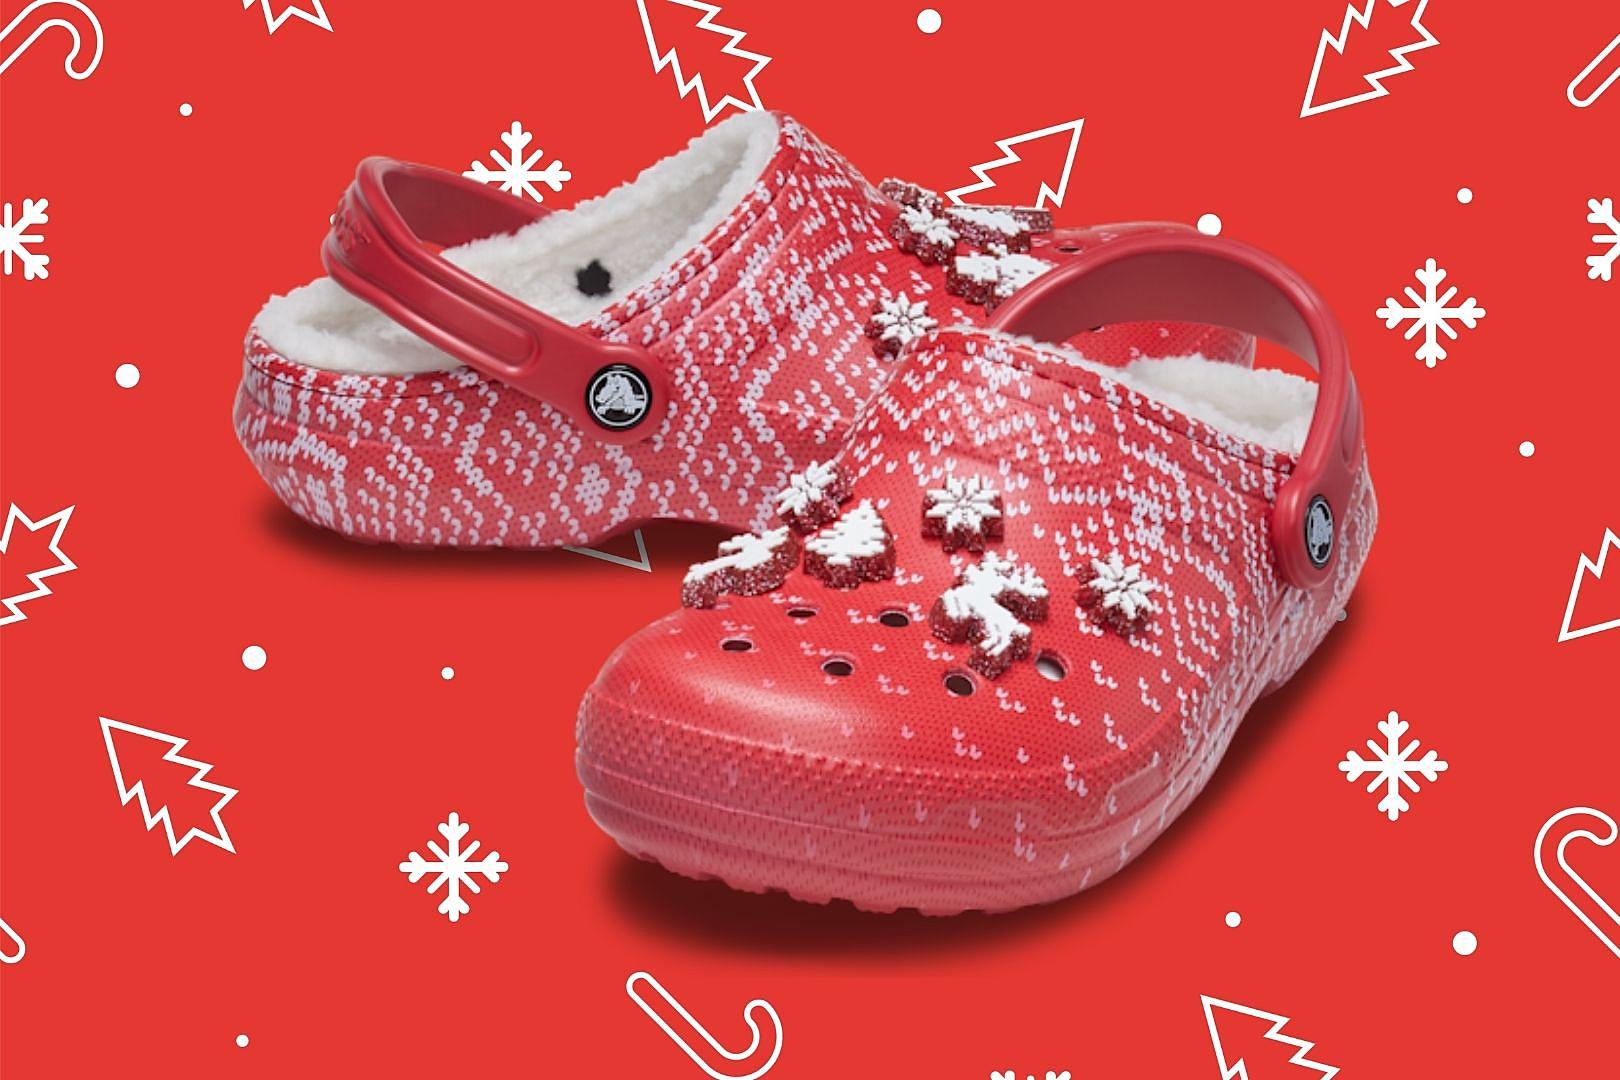 Indiana Crocs Fans: Ugly Sweater Crocs Are Coming This Christmas